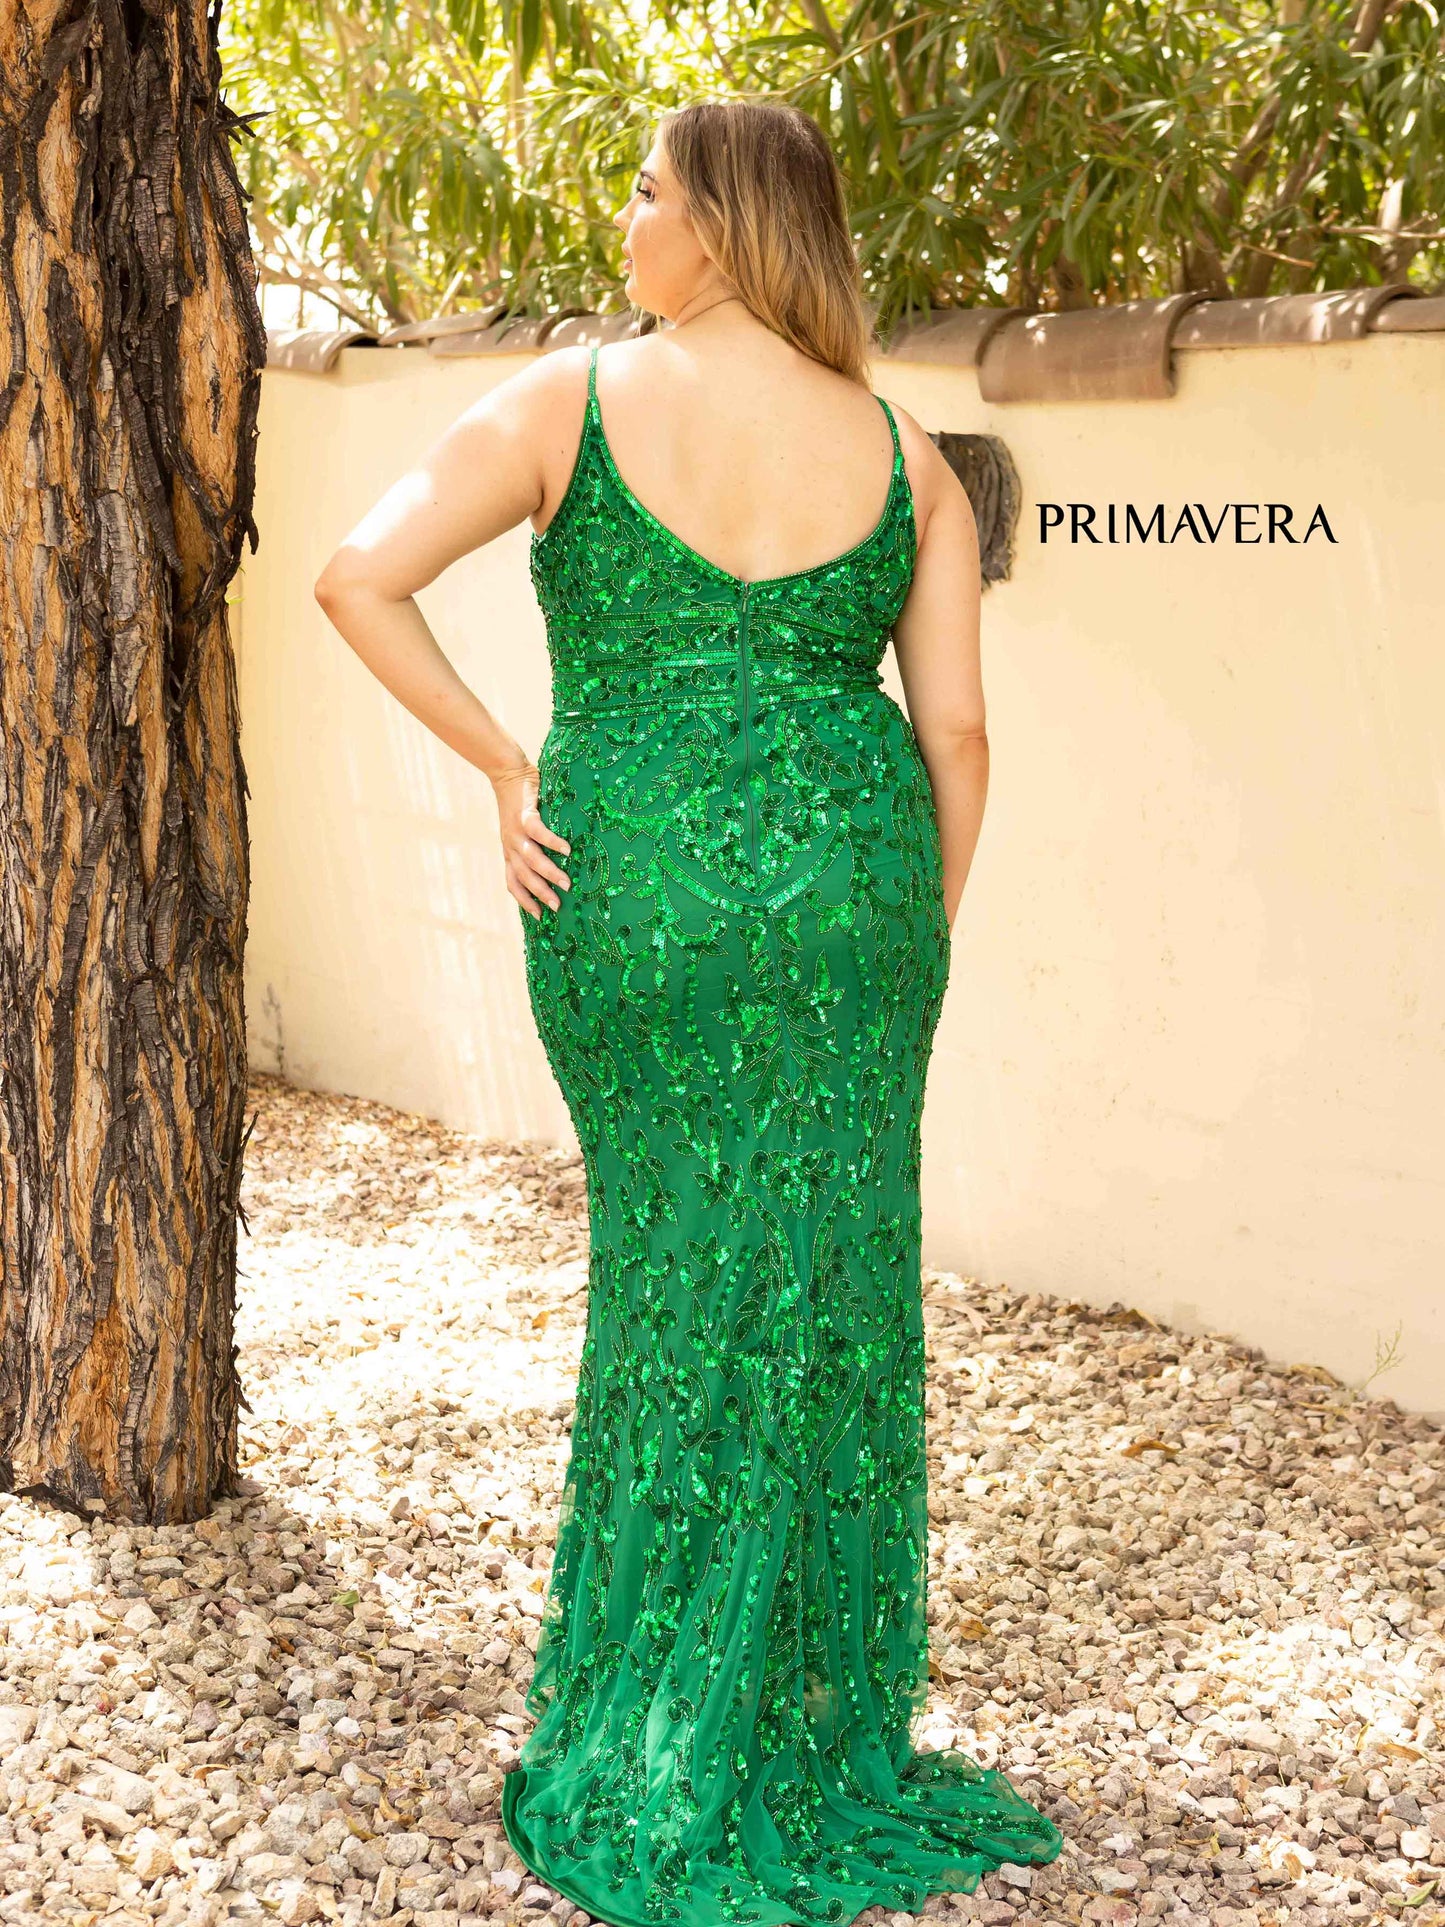 Primavera Couture 14001 Curvy Prom, Pageant and Formal Dress.  This is an all sequins plus gown with a v neckline with rows of horizontal beading at the waistline to define the waist and show your curves.